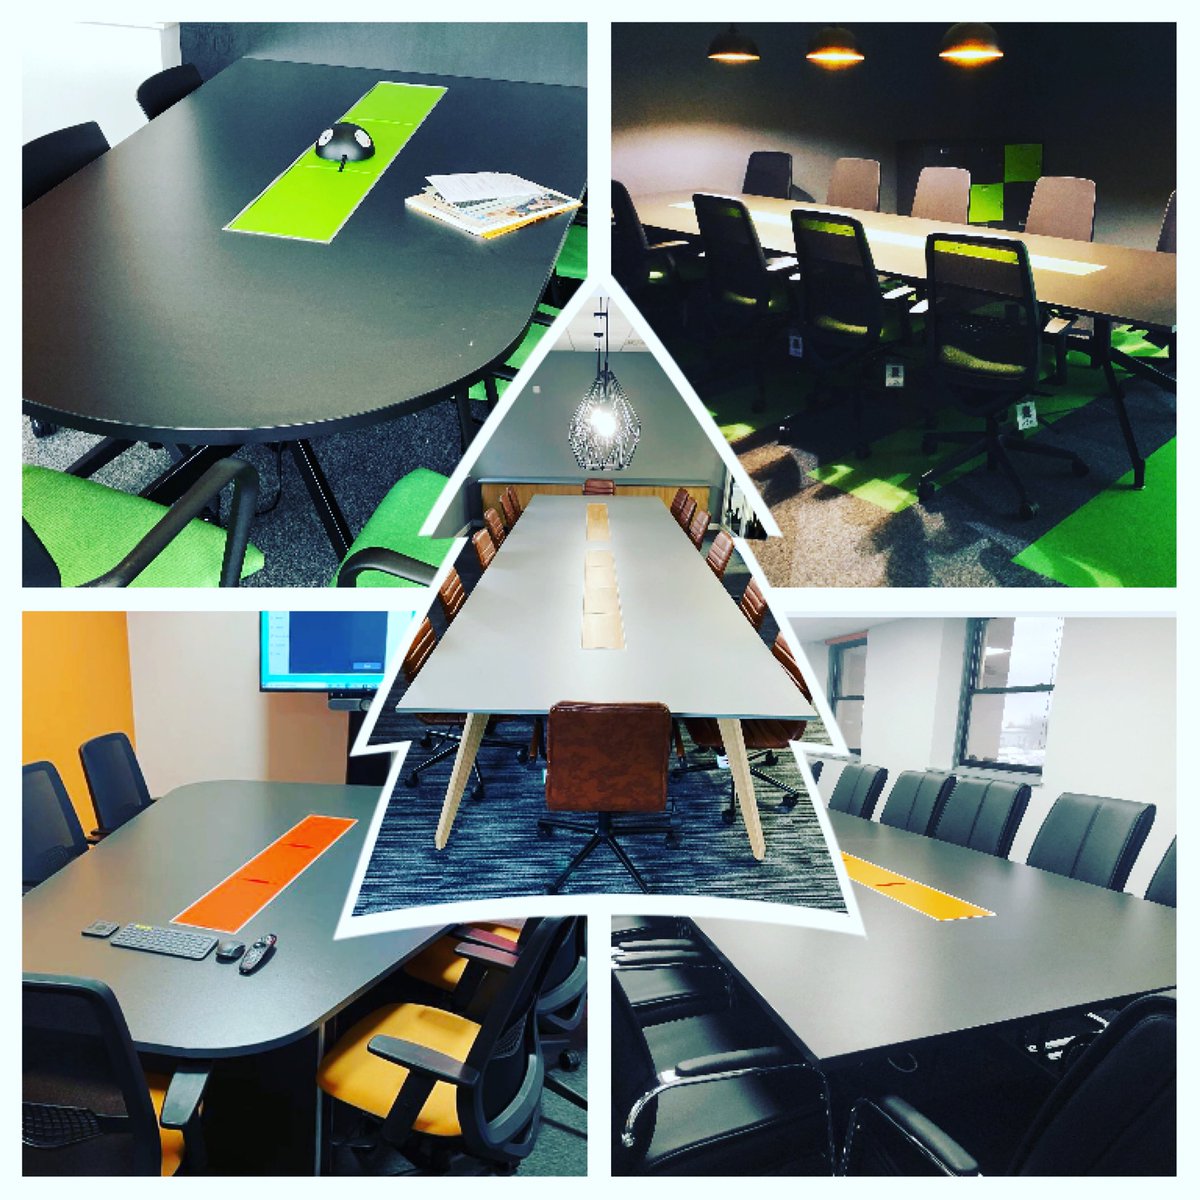 As we wind down over the next couple of days, we'd like to wish you all a very Merry Conference Table 😜 and Christmas of course 😉🎄 🎅🏻 

All the best! x

#officefurniture #officedesign #workplacedesign #workplacefurniture #workplaceinteriors #refurbishments #zoomrooms